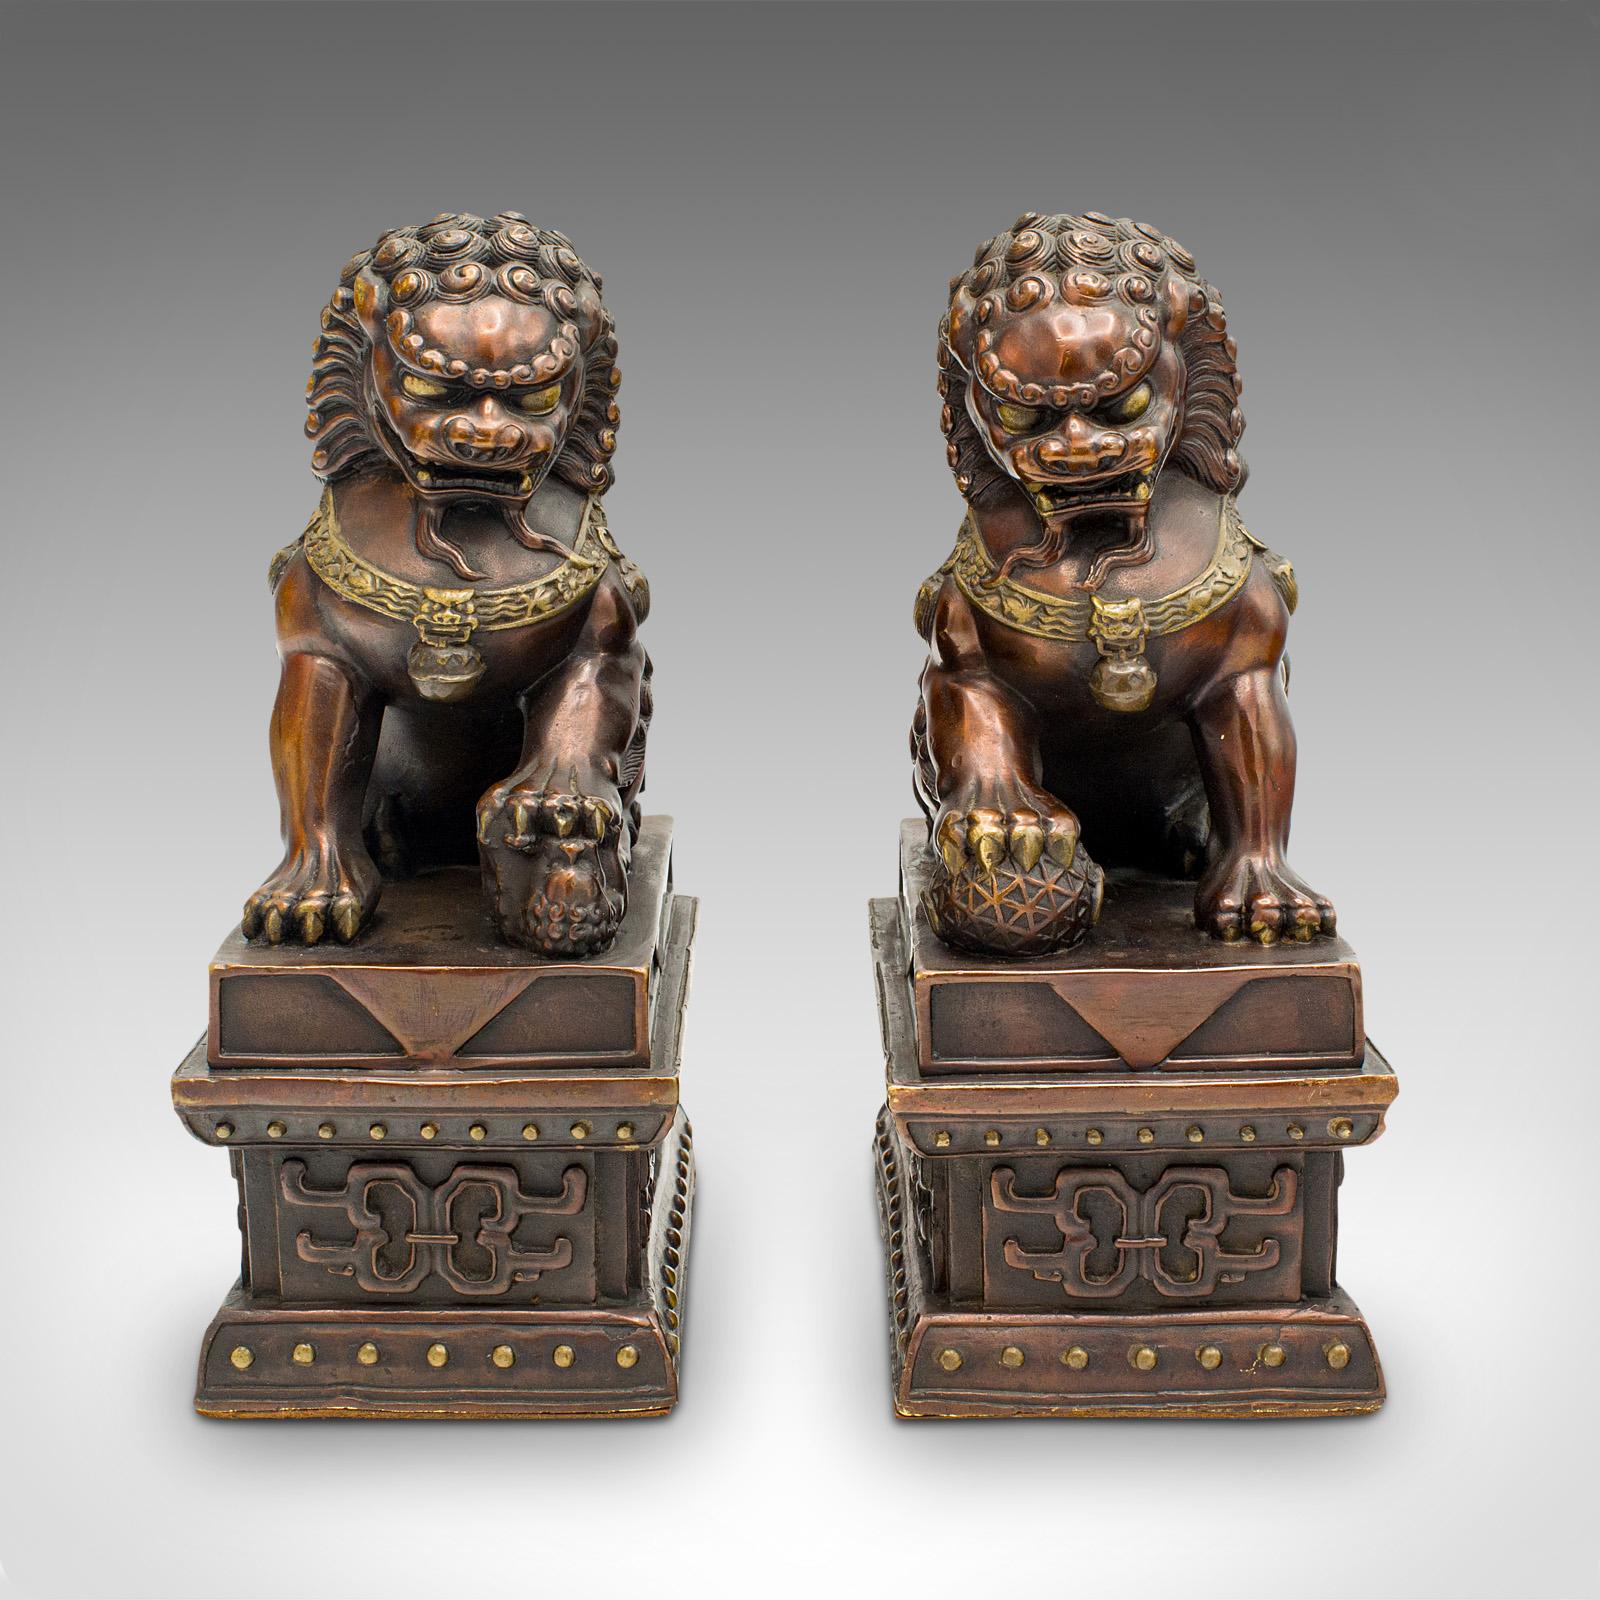 This is a pair of vintage Imperial Lion statues. A Chinese, bronze decorative ornament or bookends, dating to the late Art Deco period, circa 1940.

Exceptional bronze patination to this delightful pair of lions
Displaying a desirable aged patina